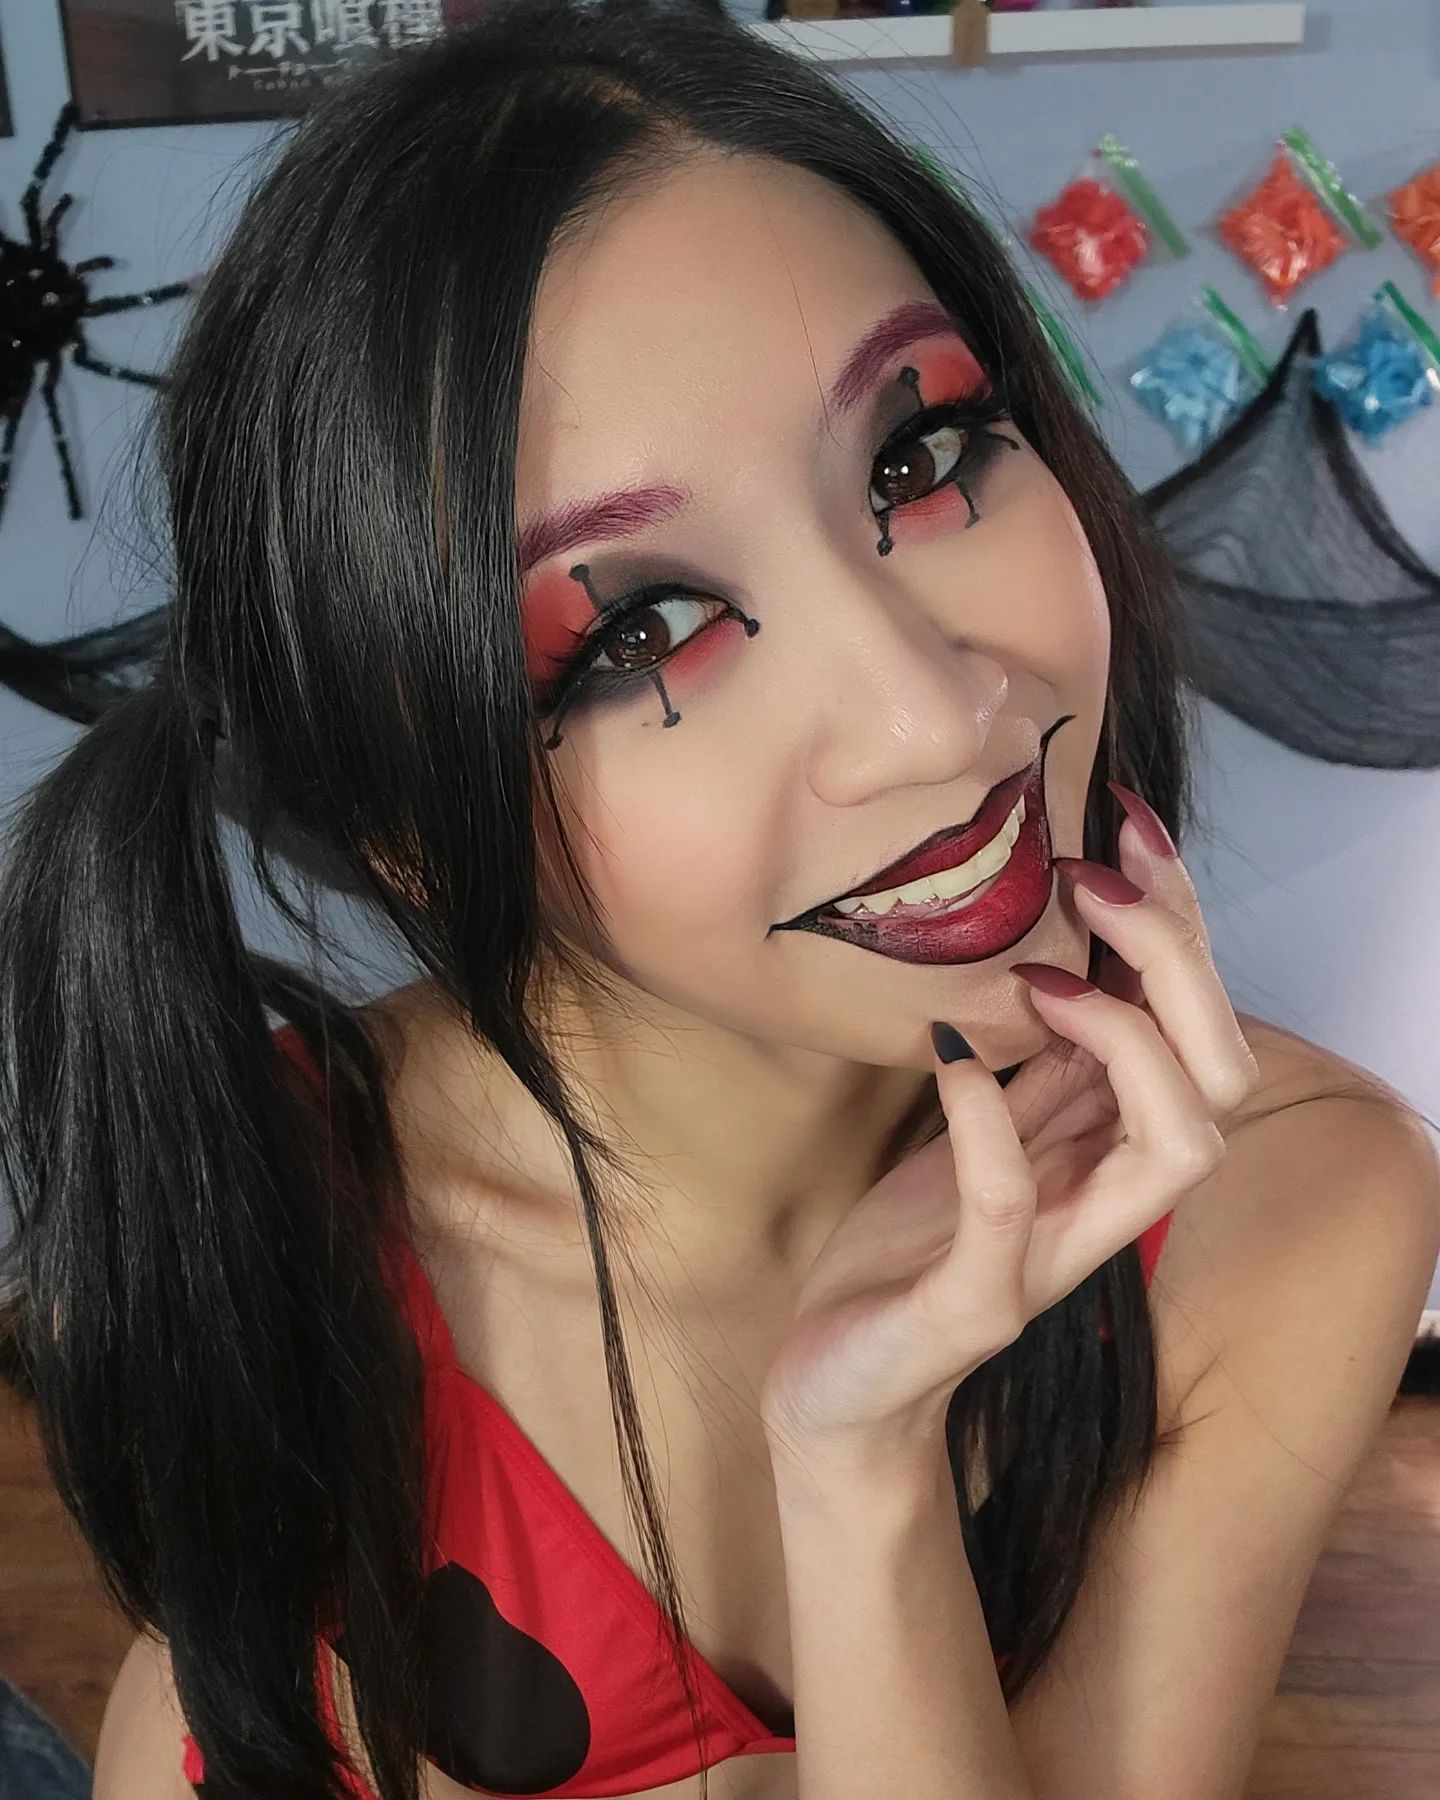 My redition of Harley Quinn makeup